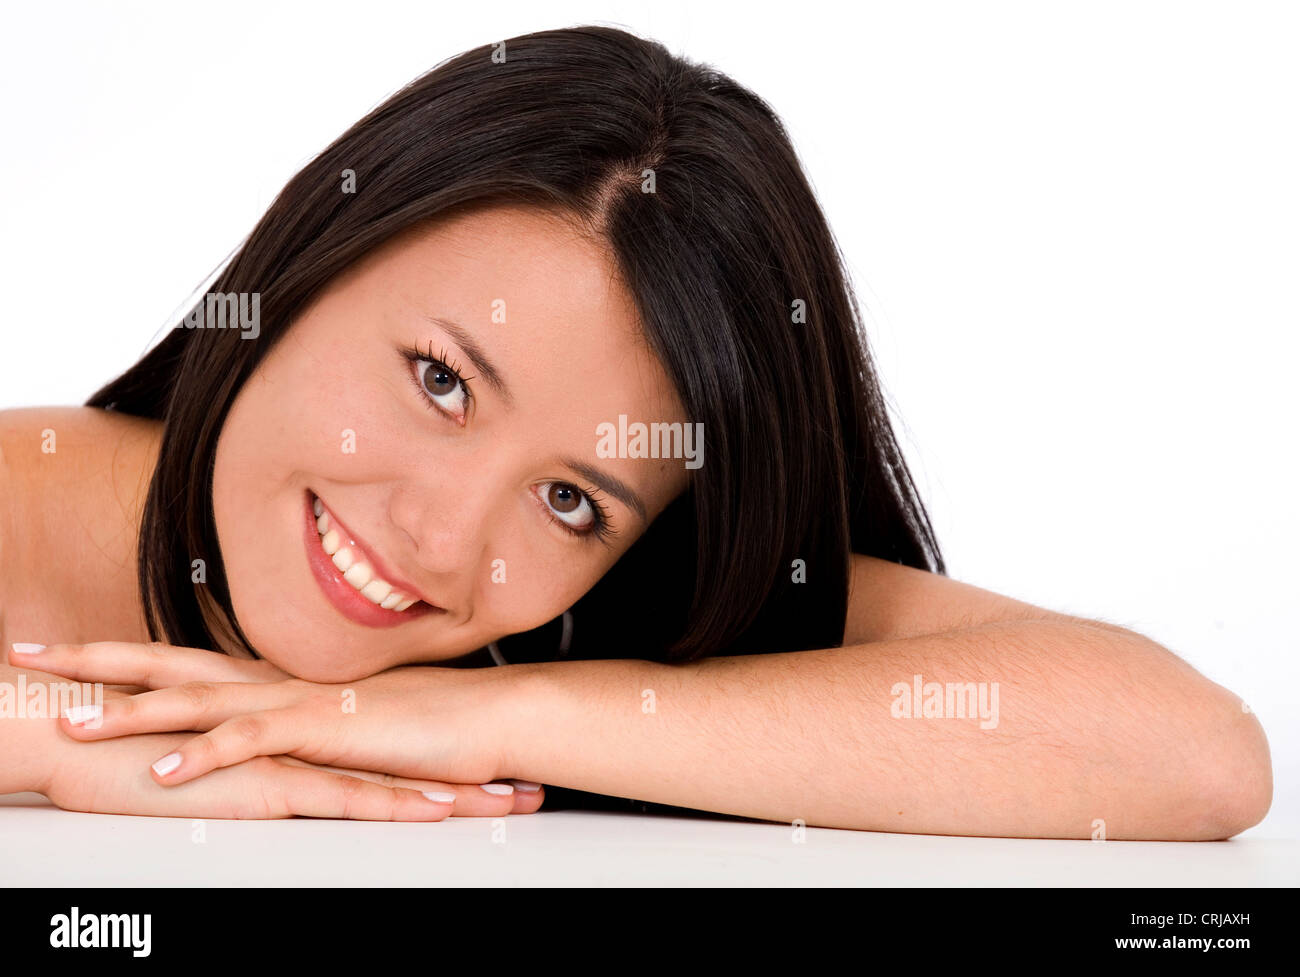 smiling young girl with the head laid on her arms Stock Photo